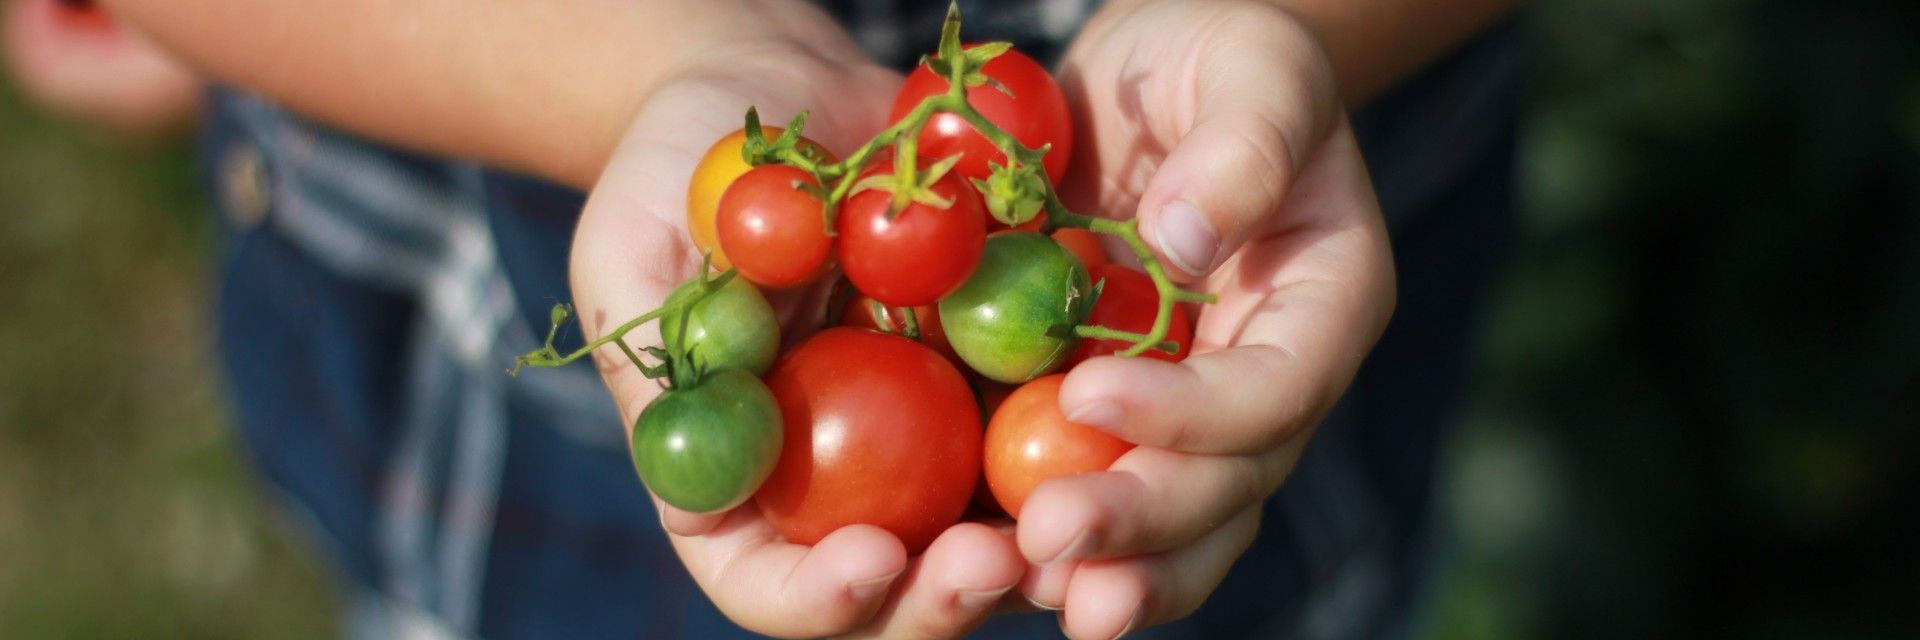 Hands holding tomatoes